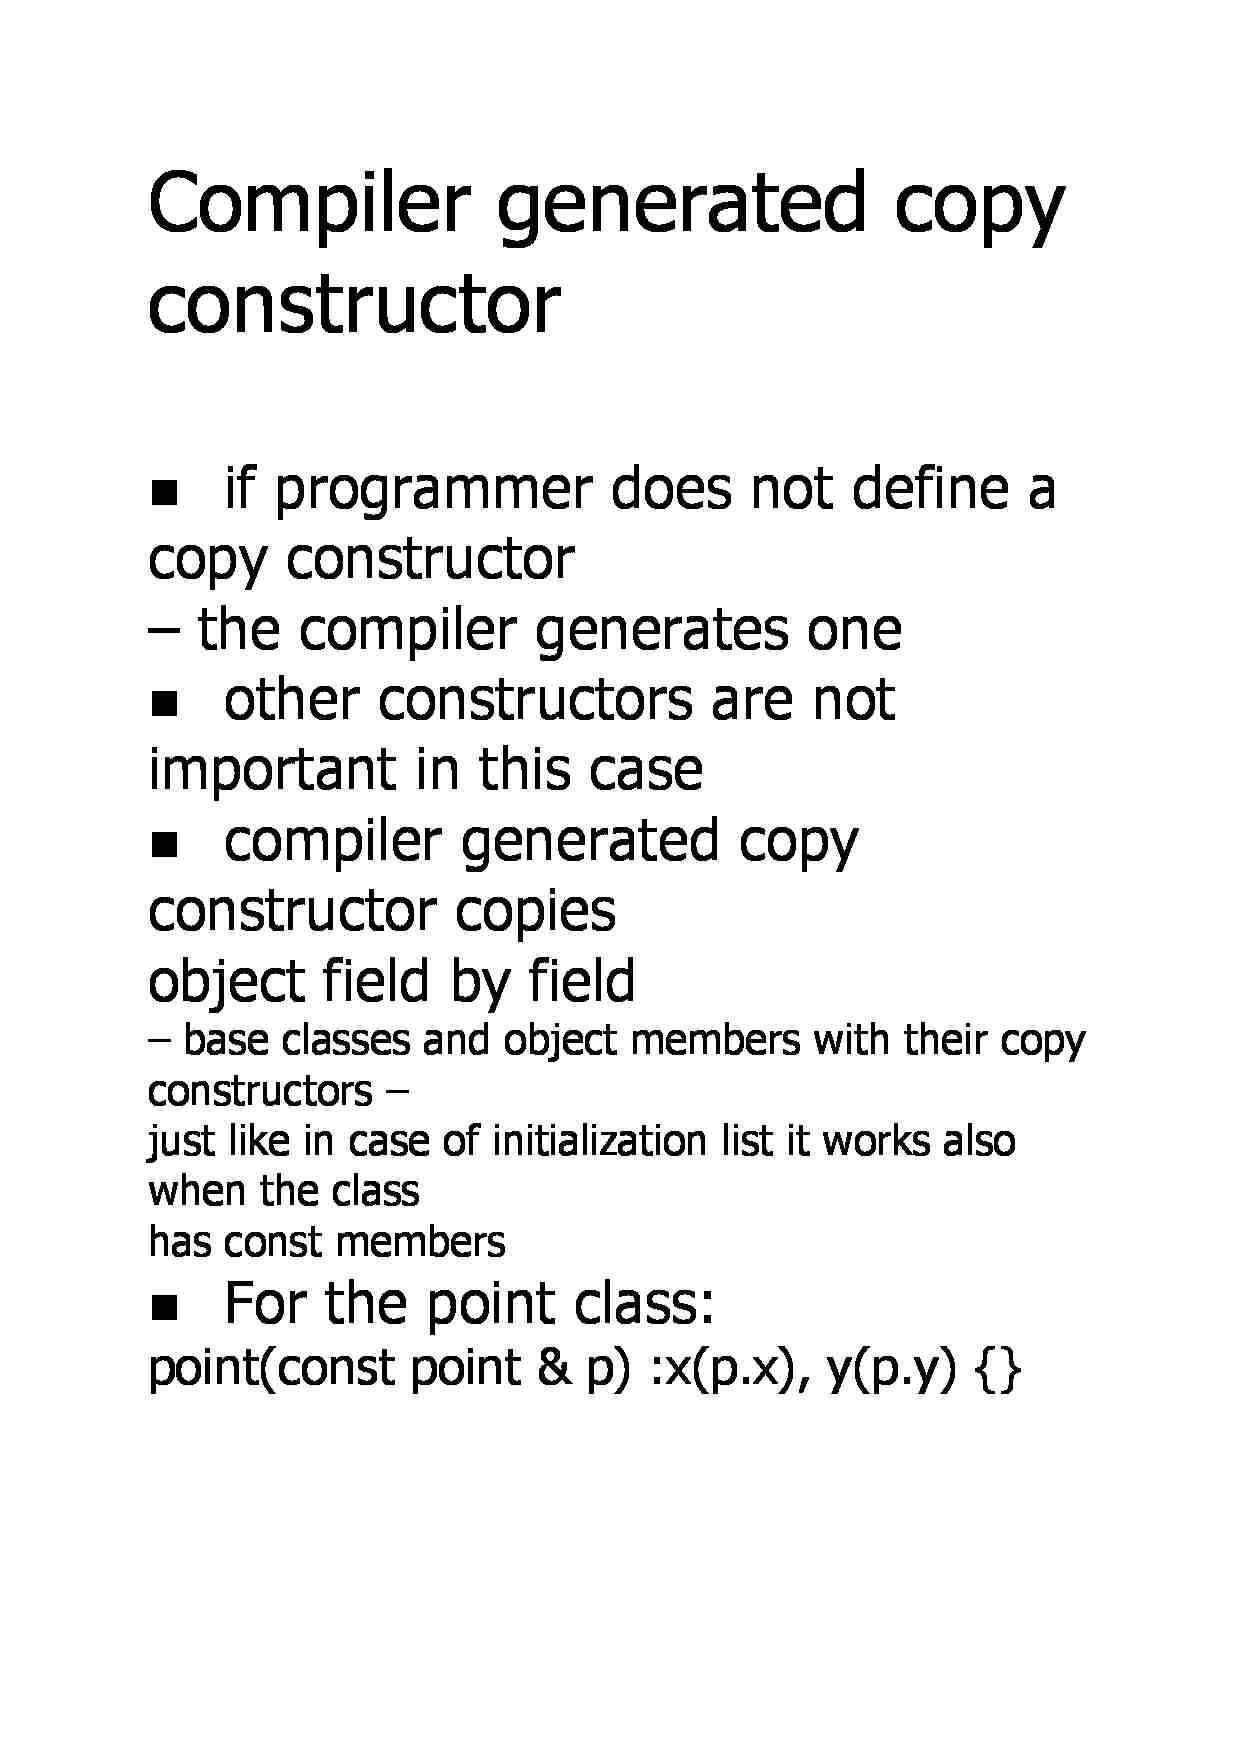 Compiler generated copy constructor - strona 1